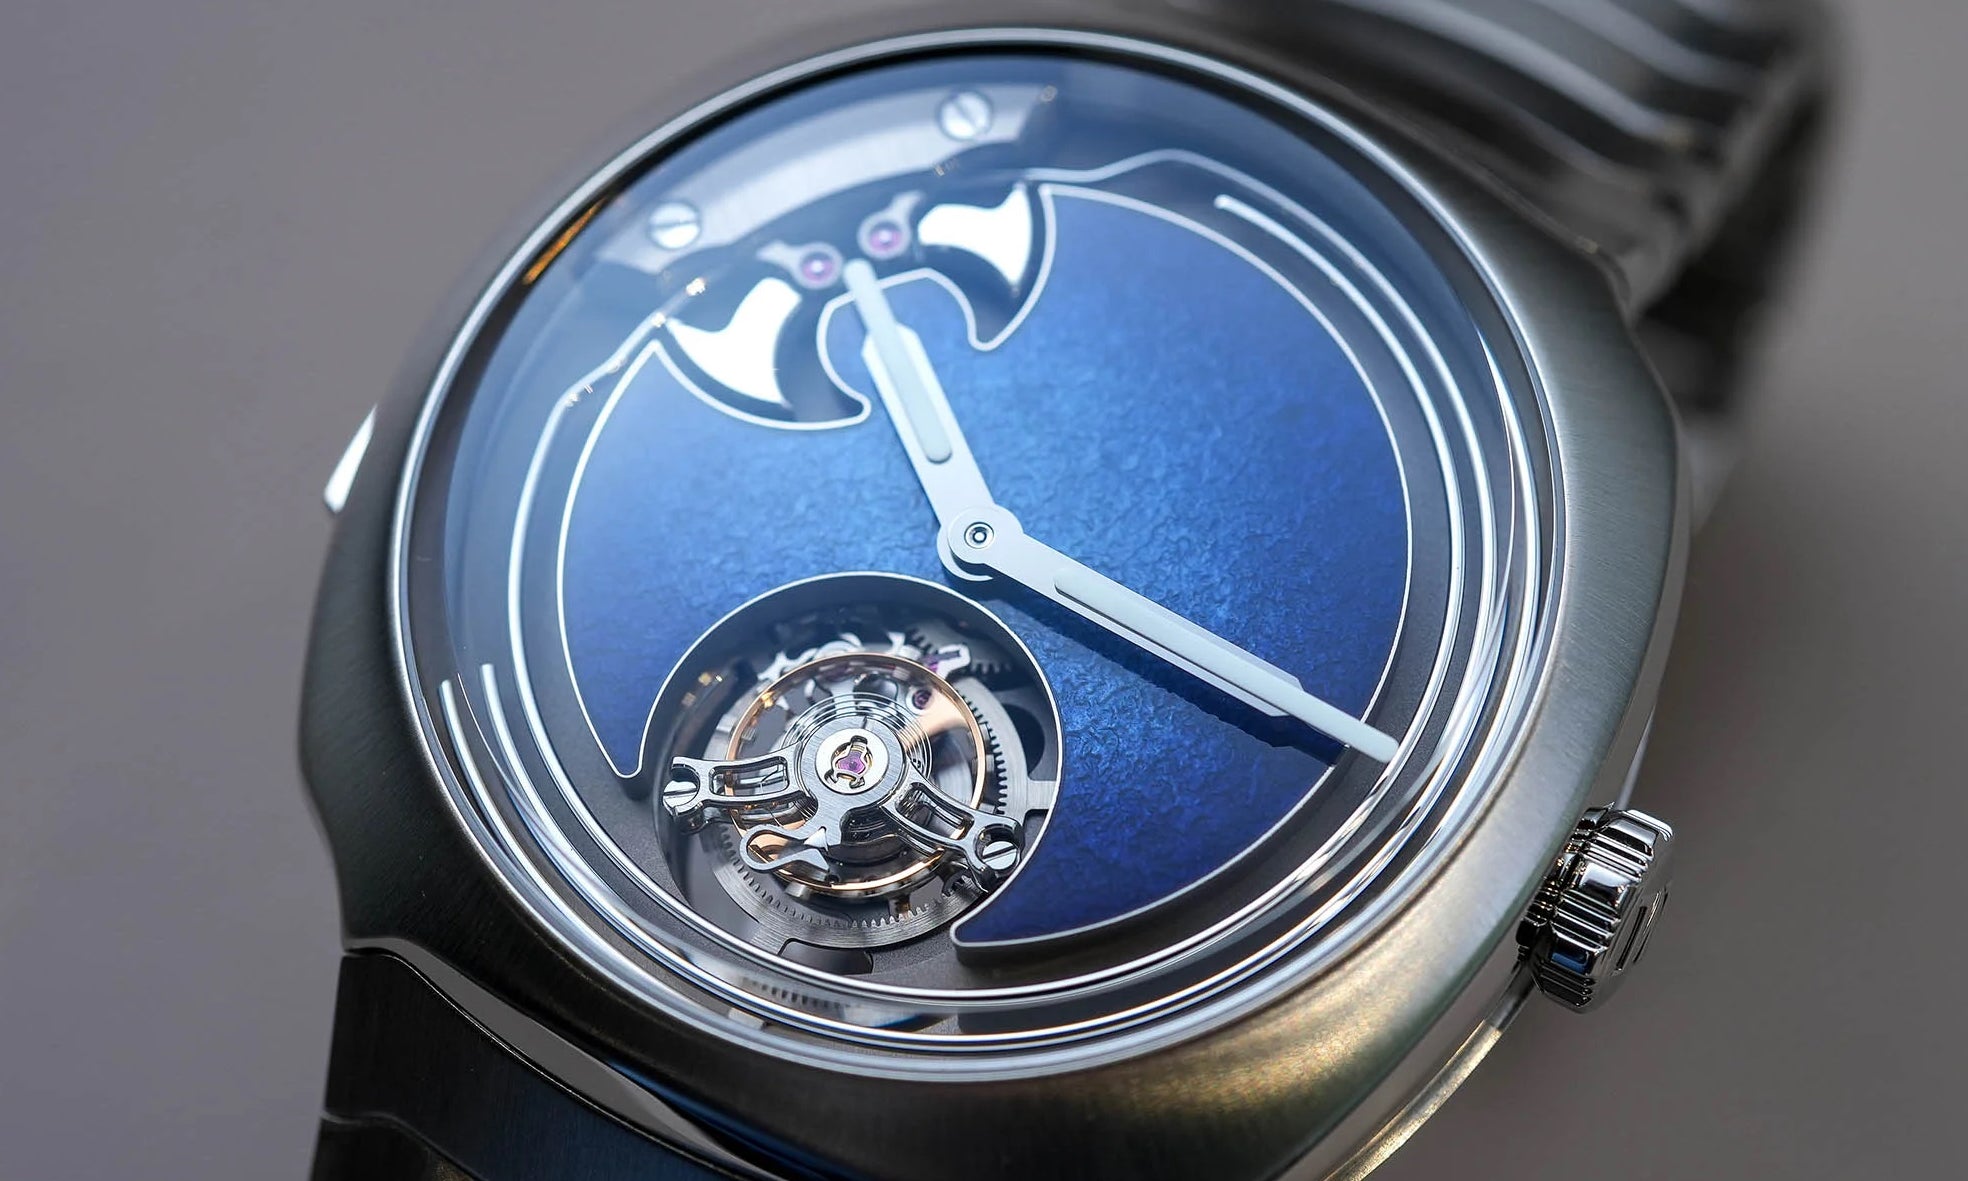 H. Moser & Cie release the Streamliner Concept Minute Repeater Tourbillon